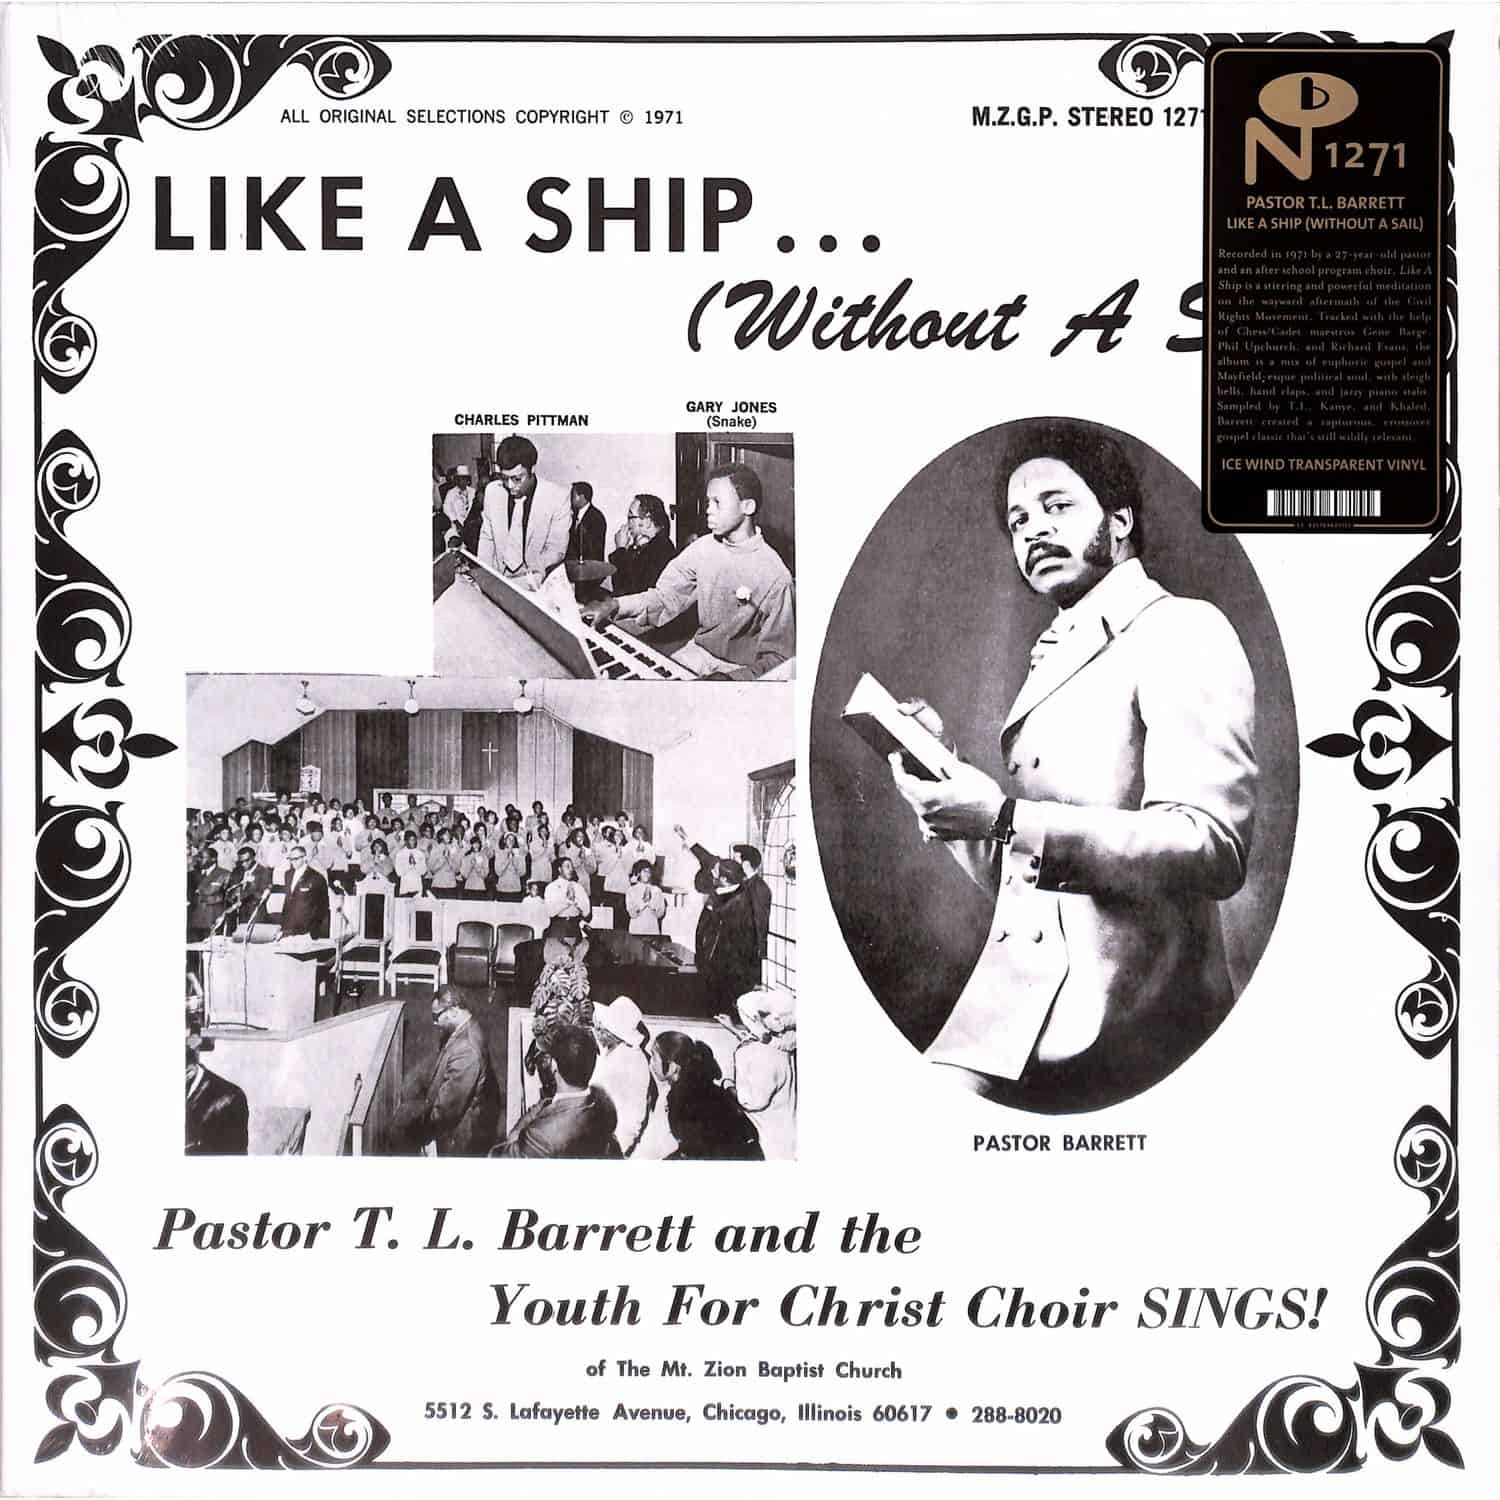 Pastor T.L. Barrett & The Youth For Christ Choir - LIKE A SHIP 